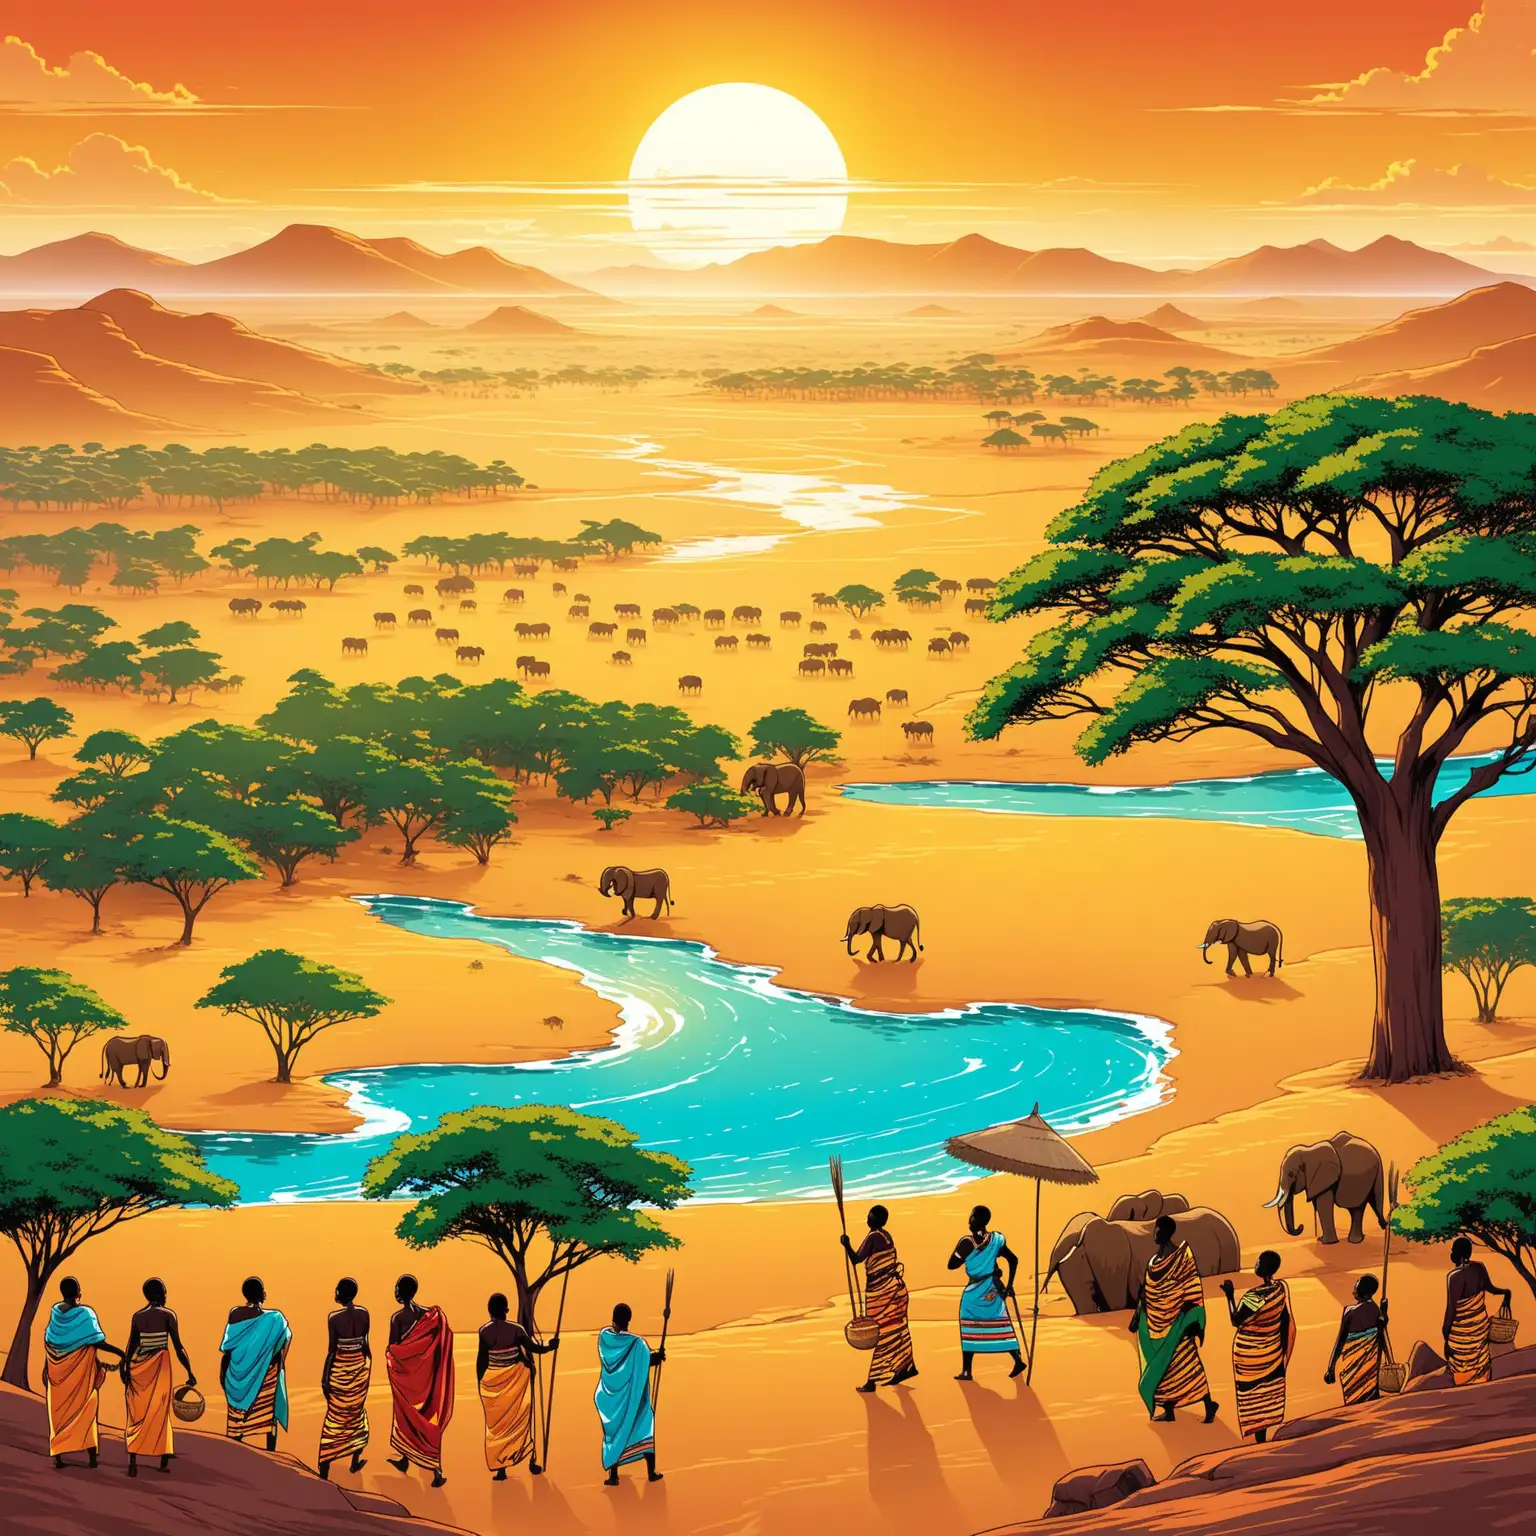 Illustrate an image of the vast and beautiful continent of Africa. Show fresh trees, food, people in traditional african wear.